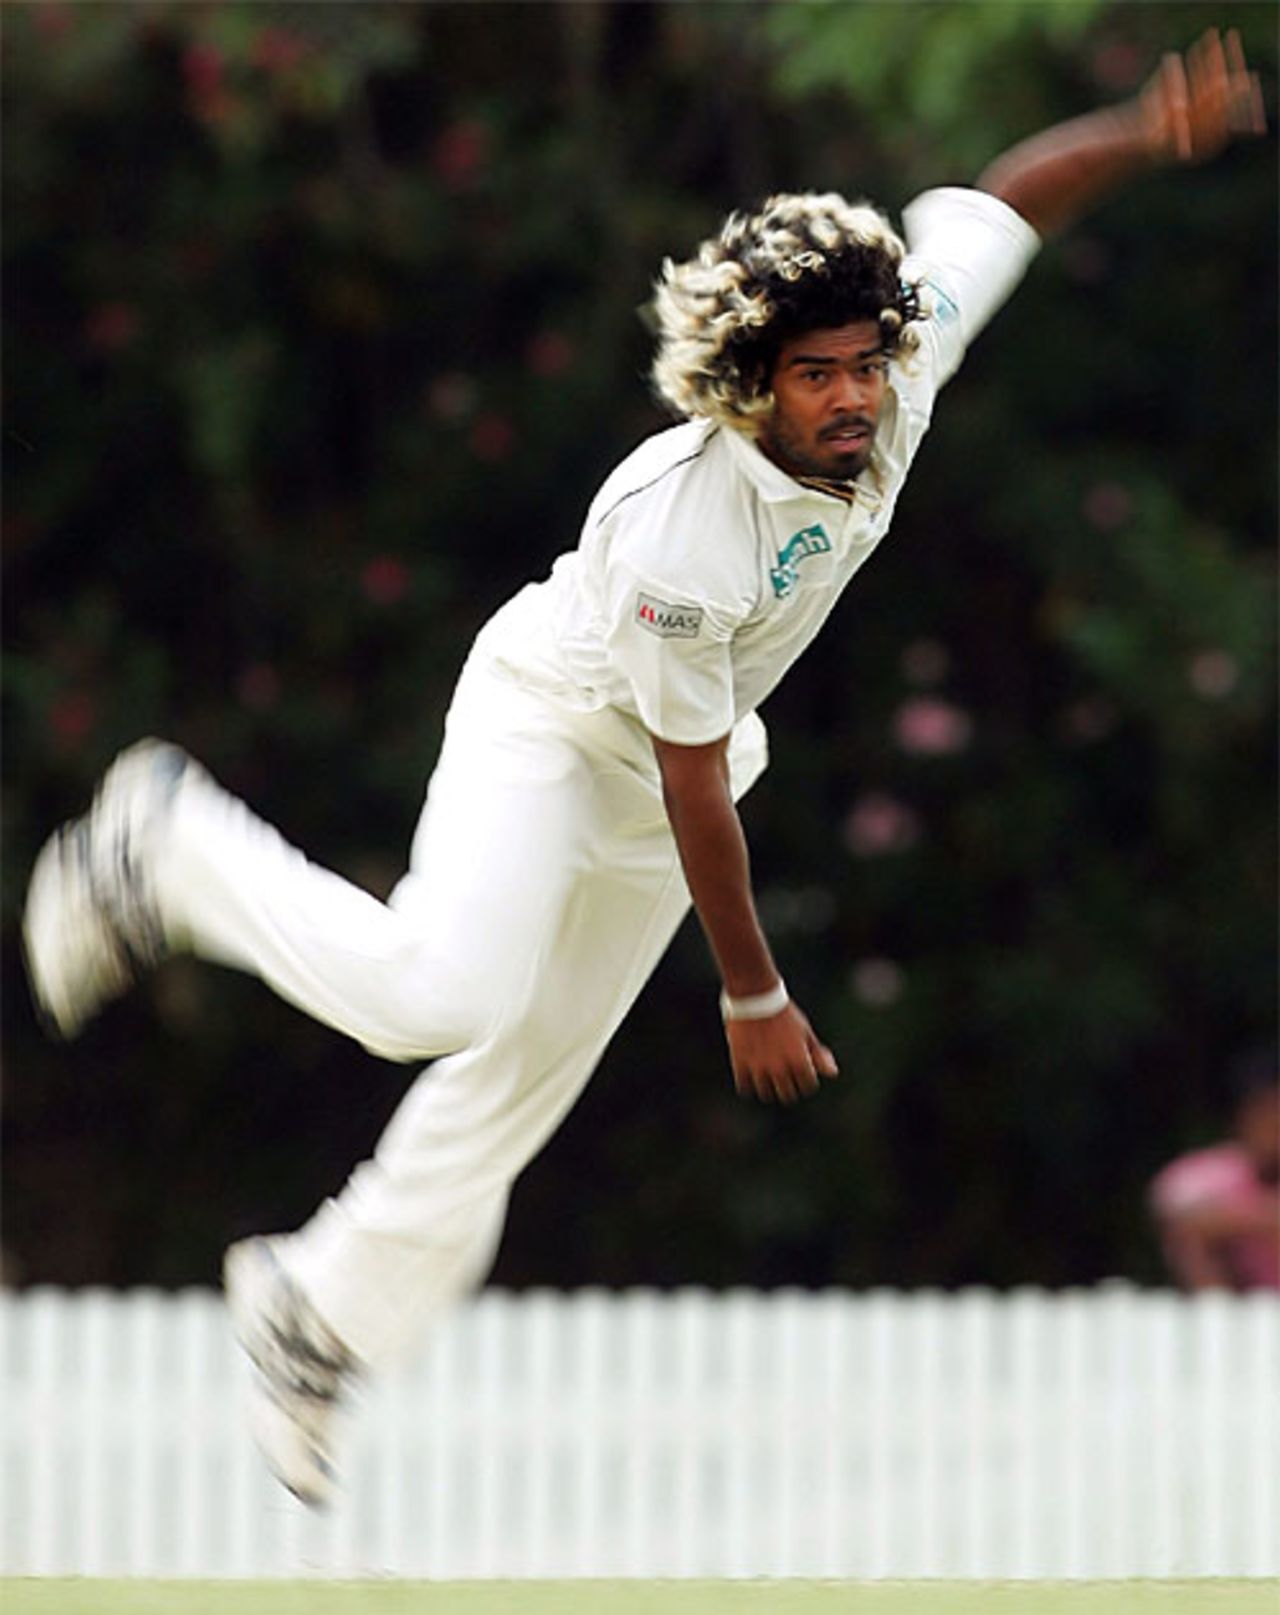 Lasith Malinga was soon in the wickets on the first day, Queensland v Sri Lankans, 3rd day, Brisbane, November 2, 2007